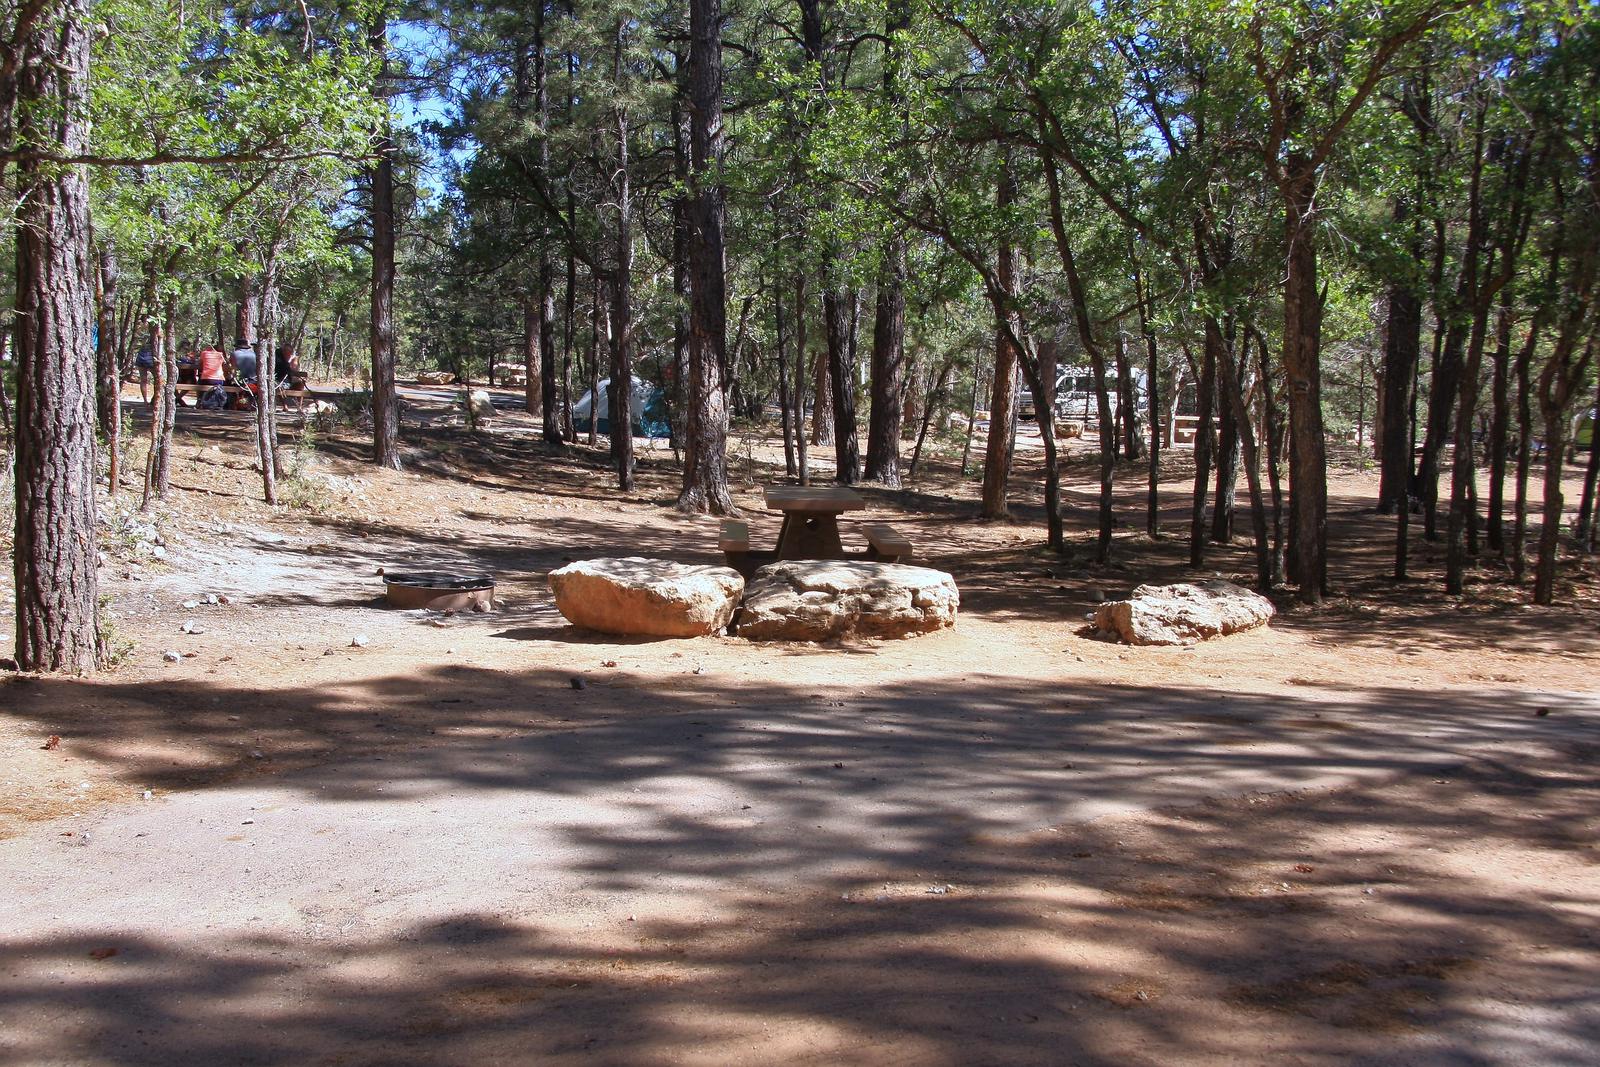 Picnic table, fire pit, and parking spot, Mather CampgroundPicnic table, fire pit, and parking spot for Fir Loop 62, Mather Campground